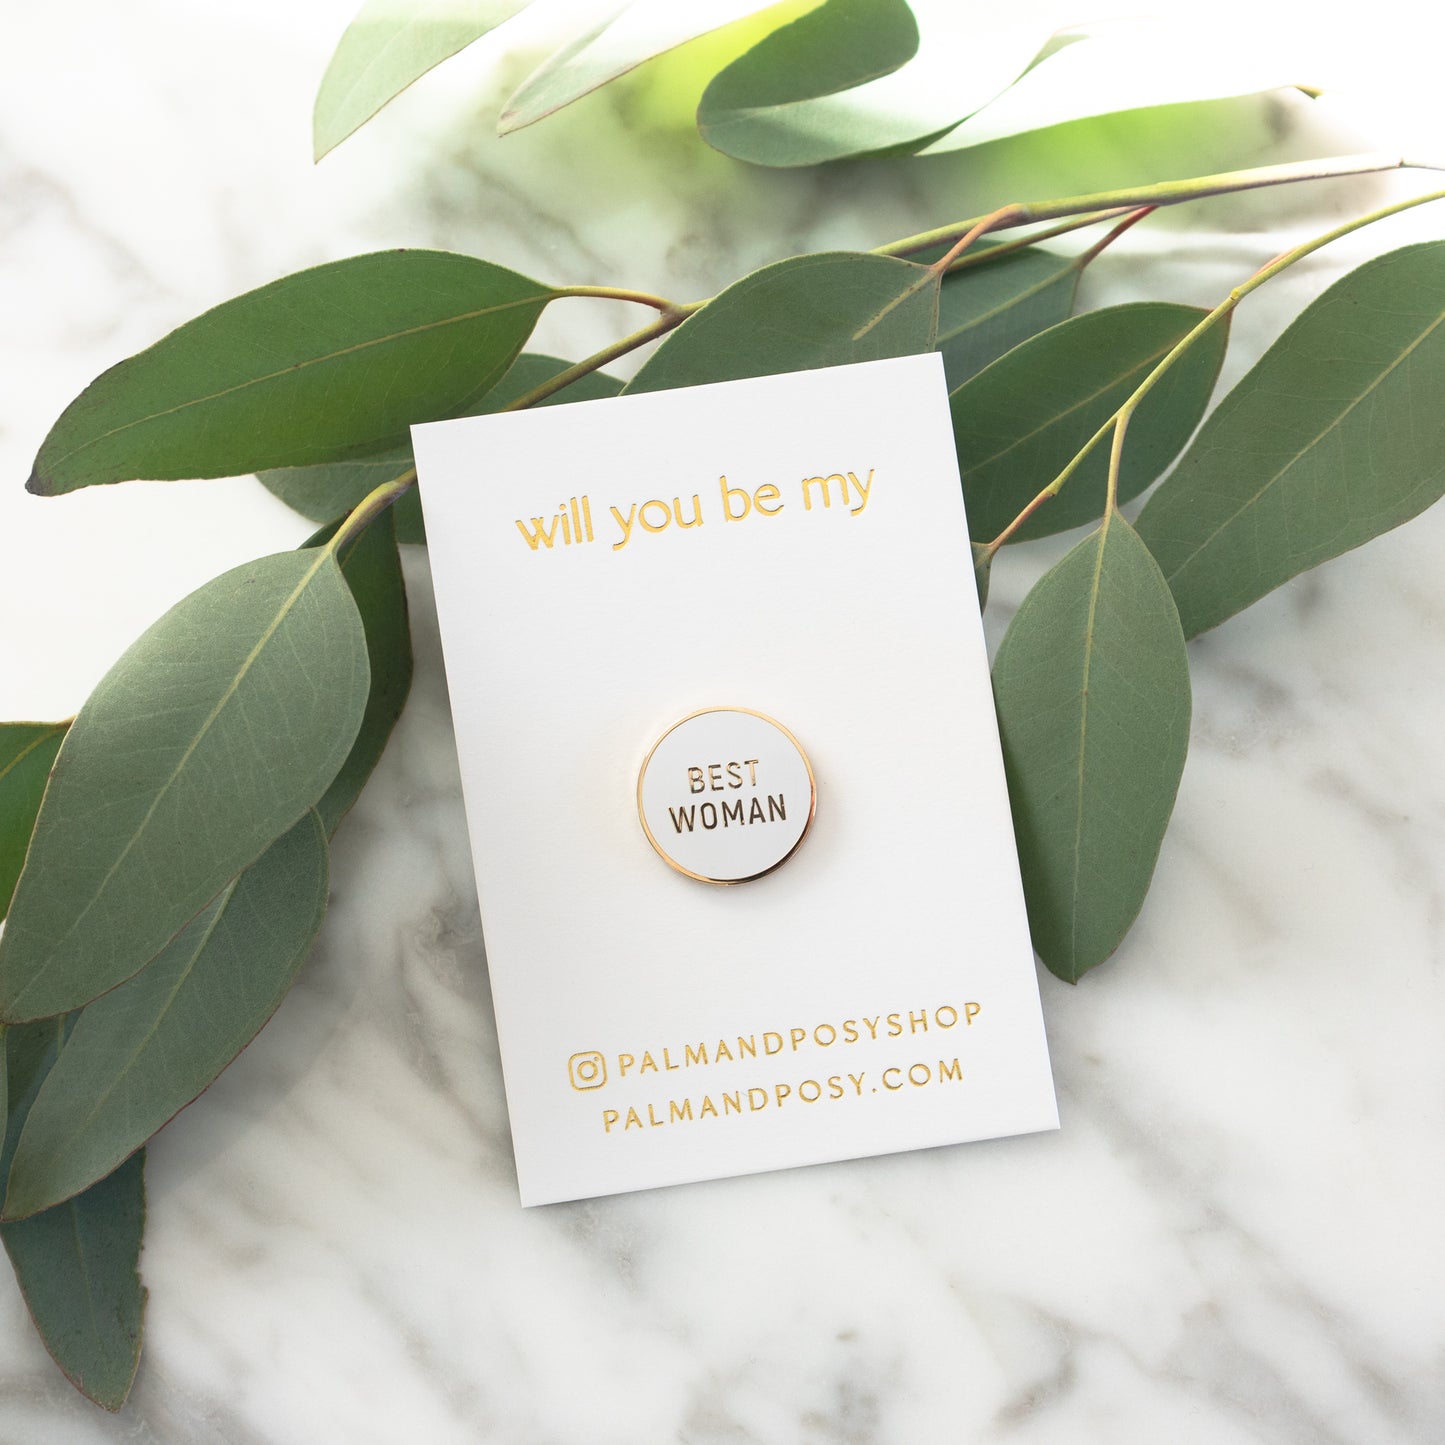 
                  
                    Best Woman Pin | Palm and Posy
                  
                